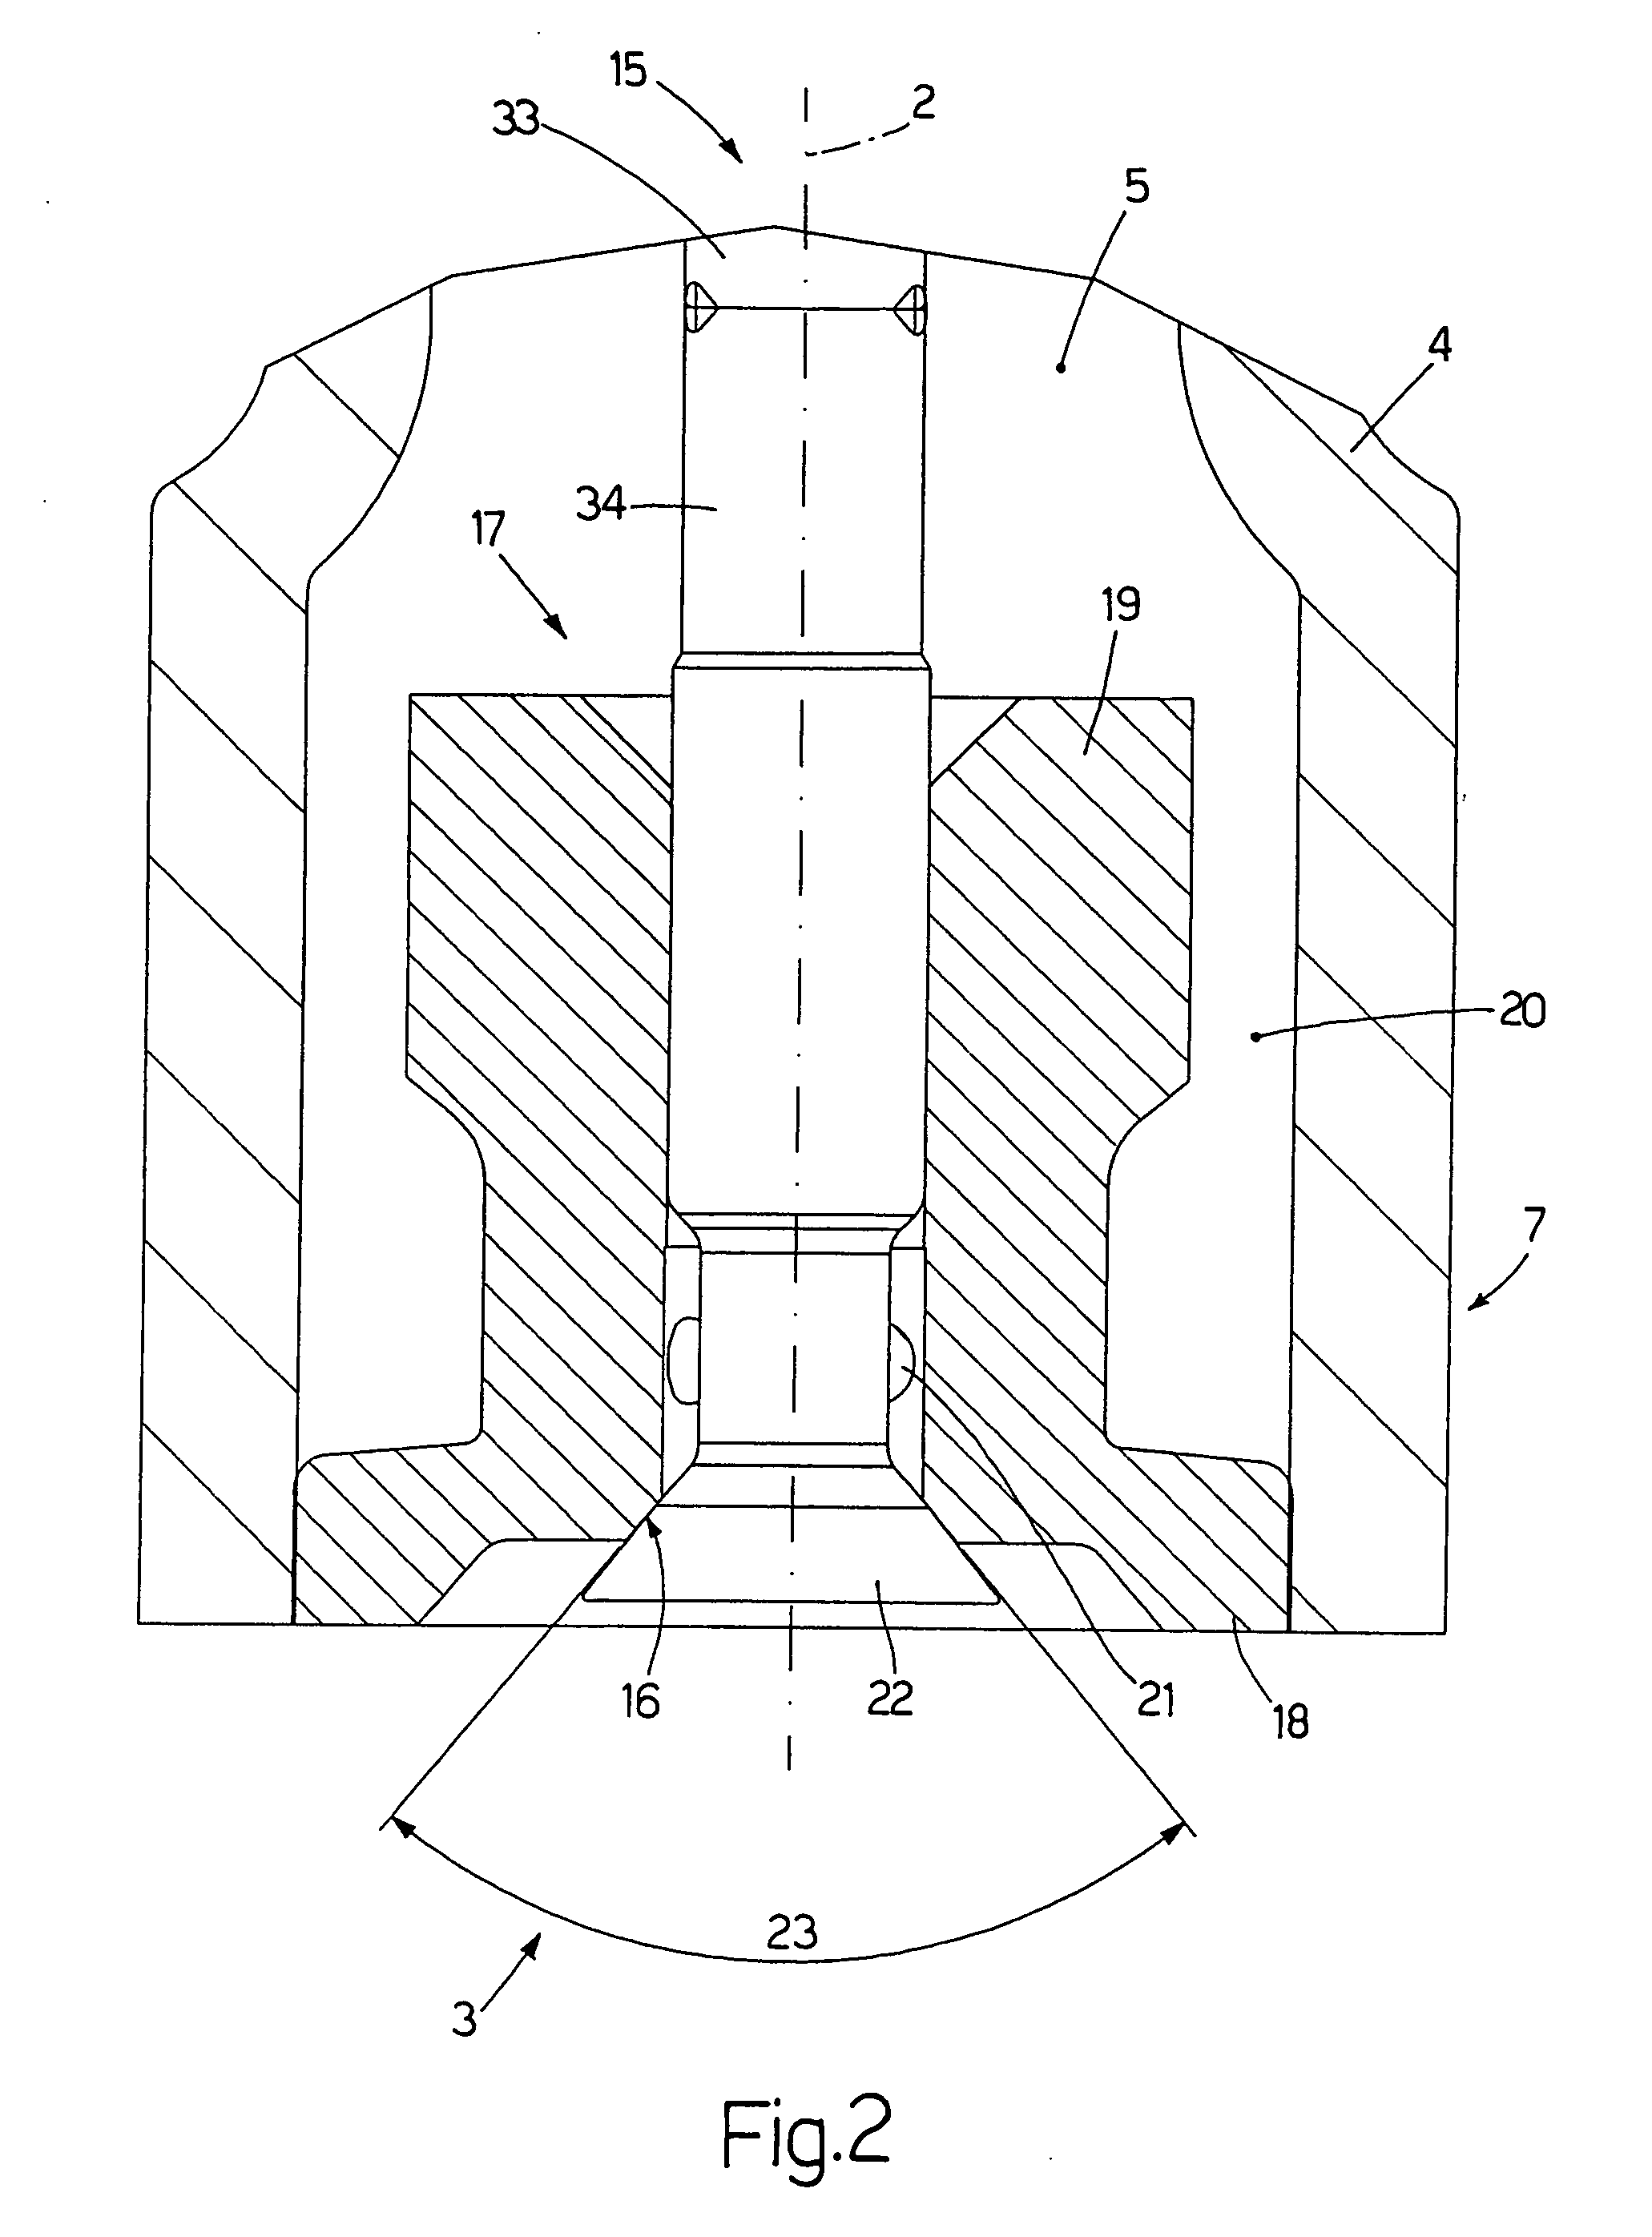 Fuel injector with electromagnetic actuator